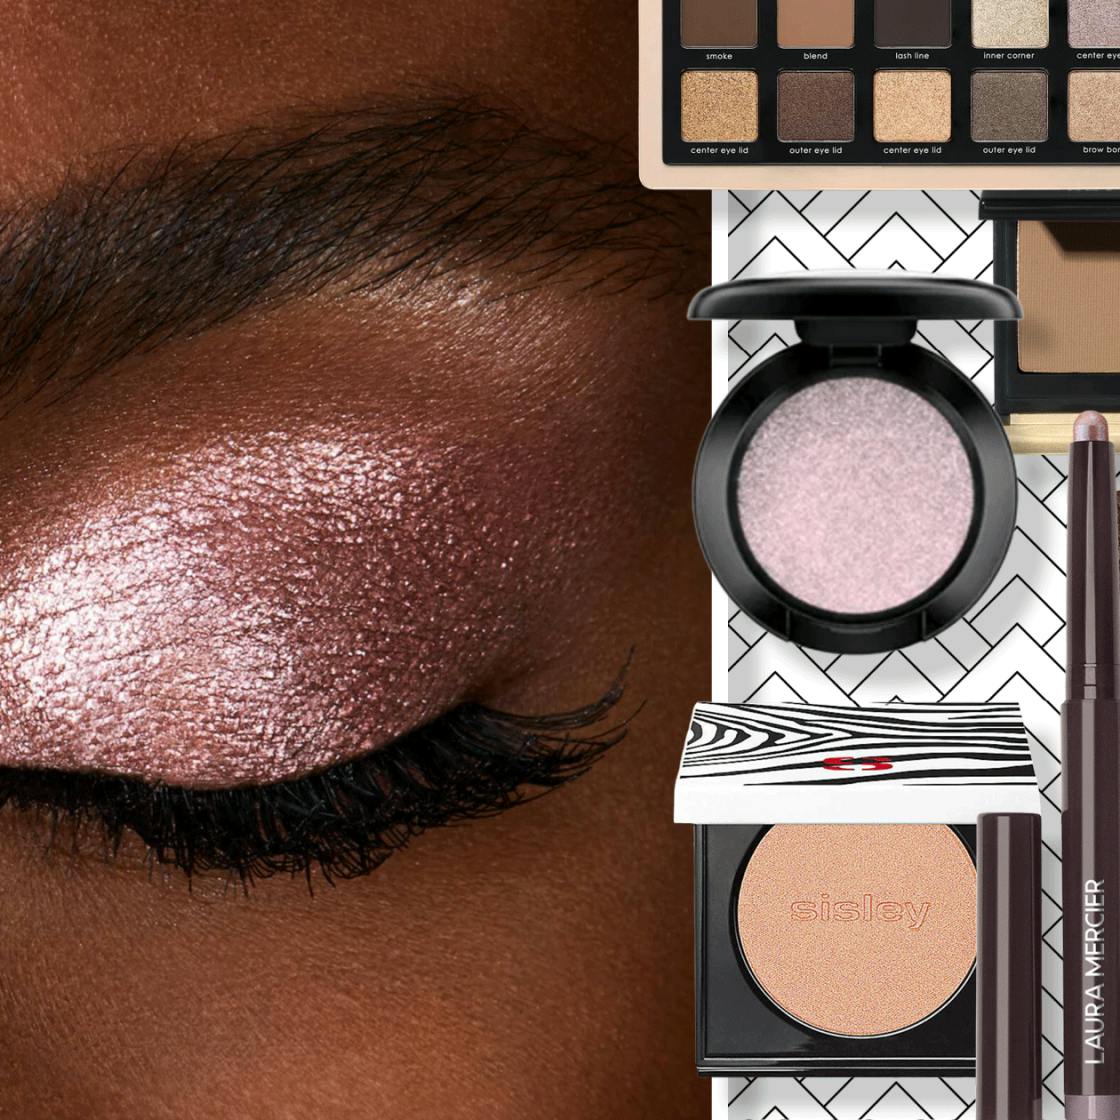 Cool-toned make-up tips from 3 expert make-up artists